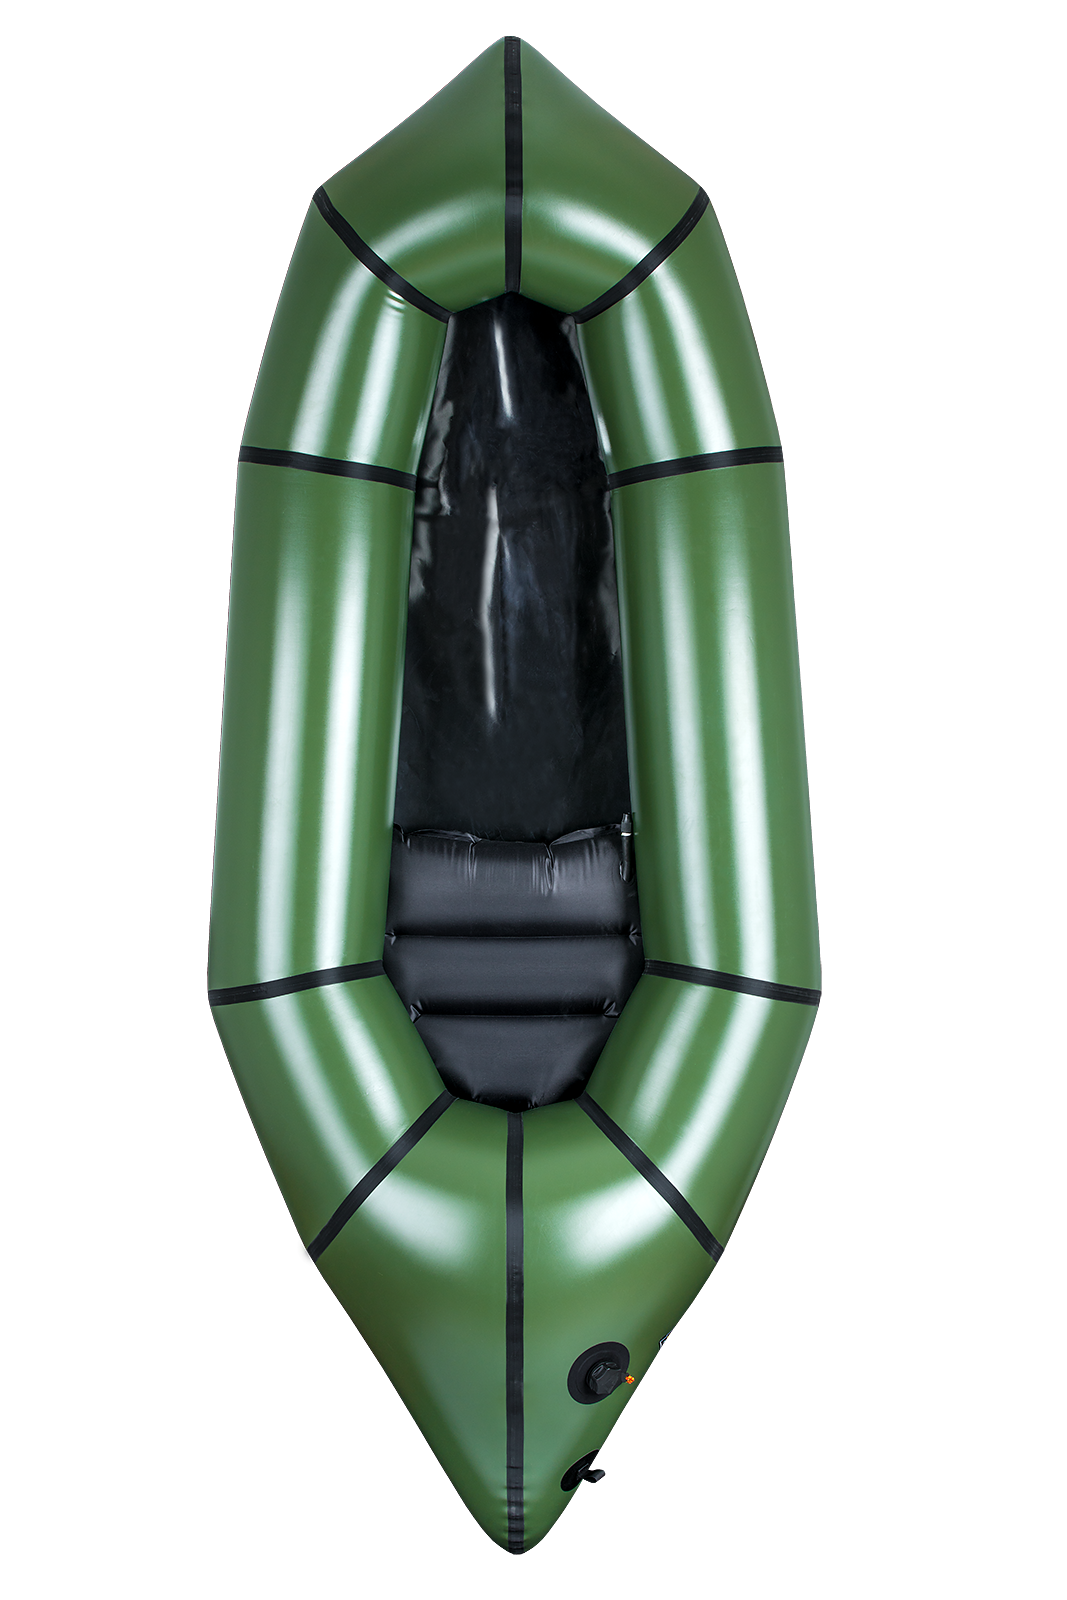 An Alpacka Raft Scout against a white background.